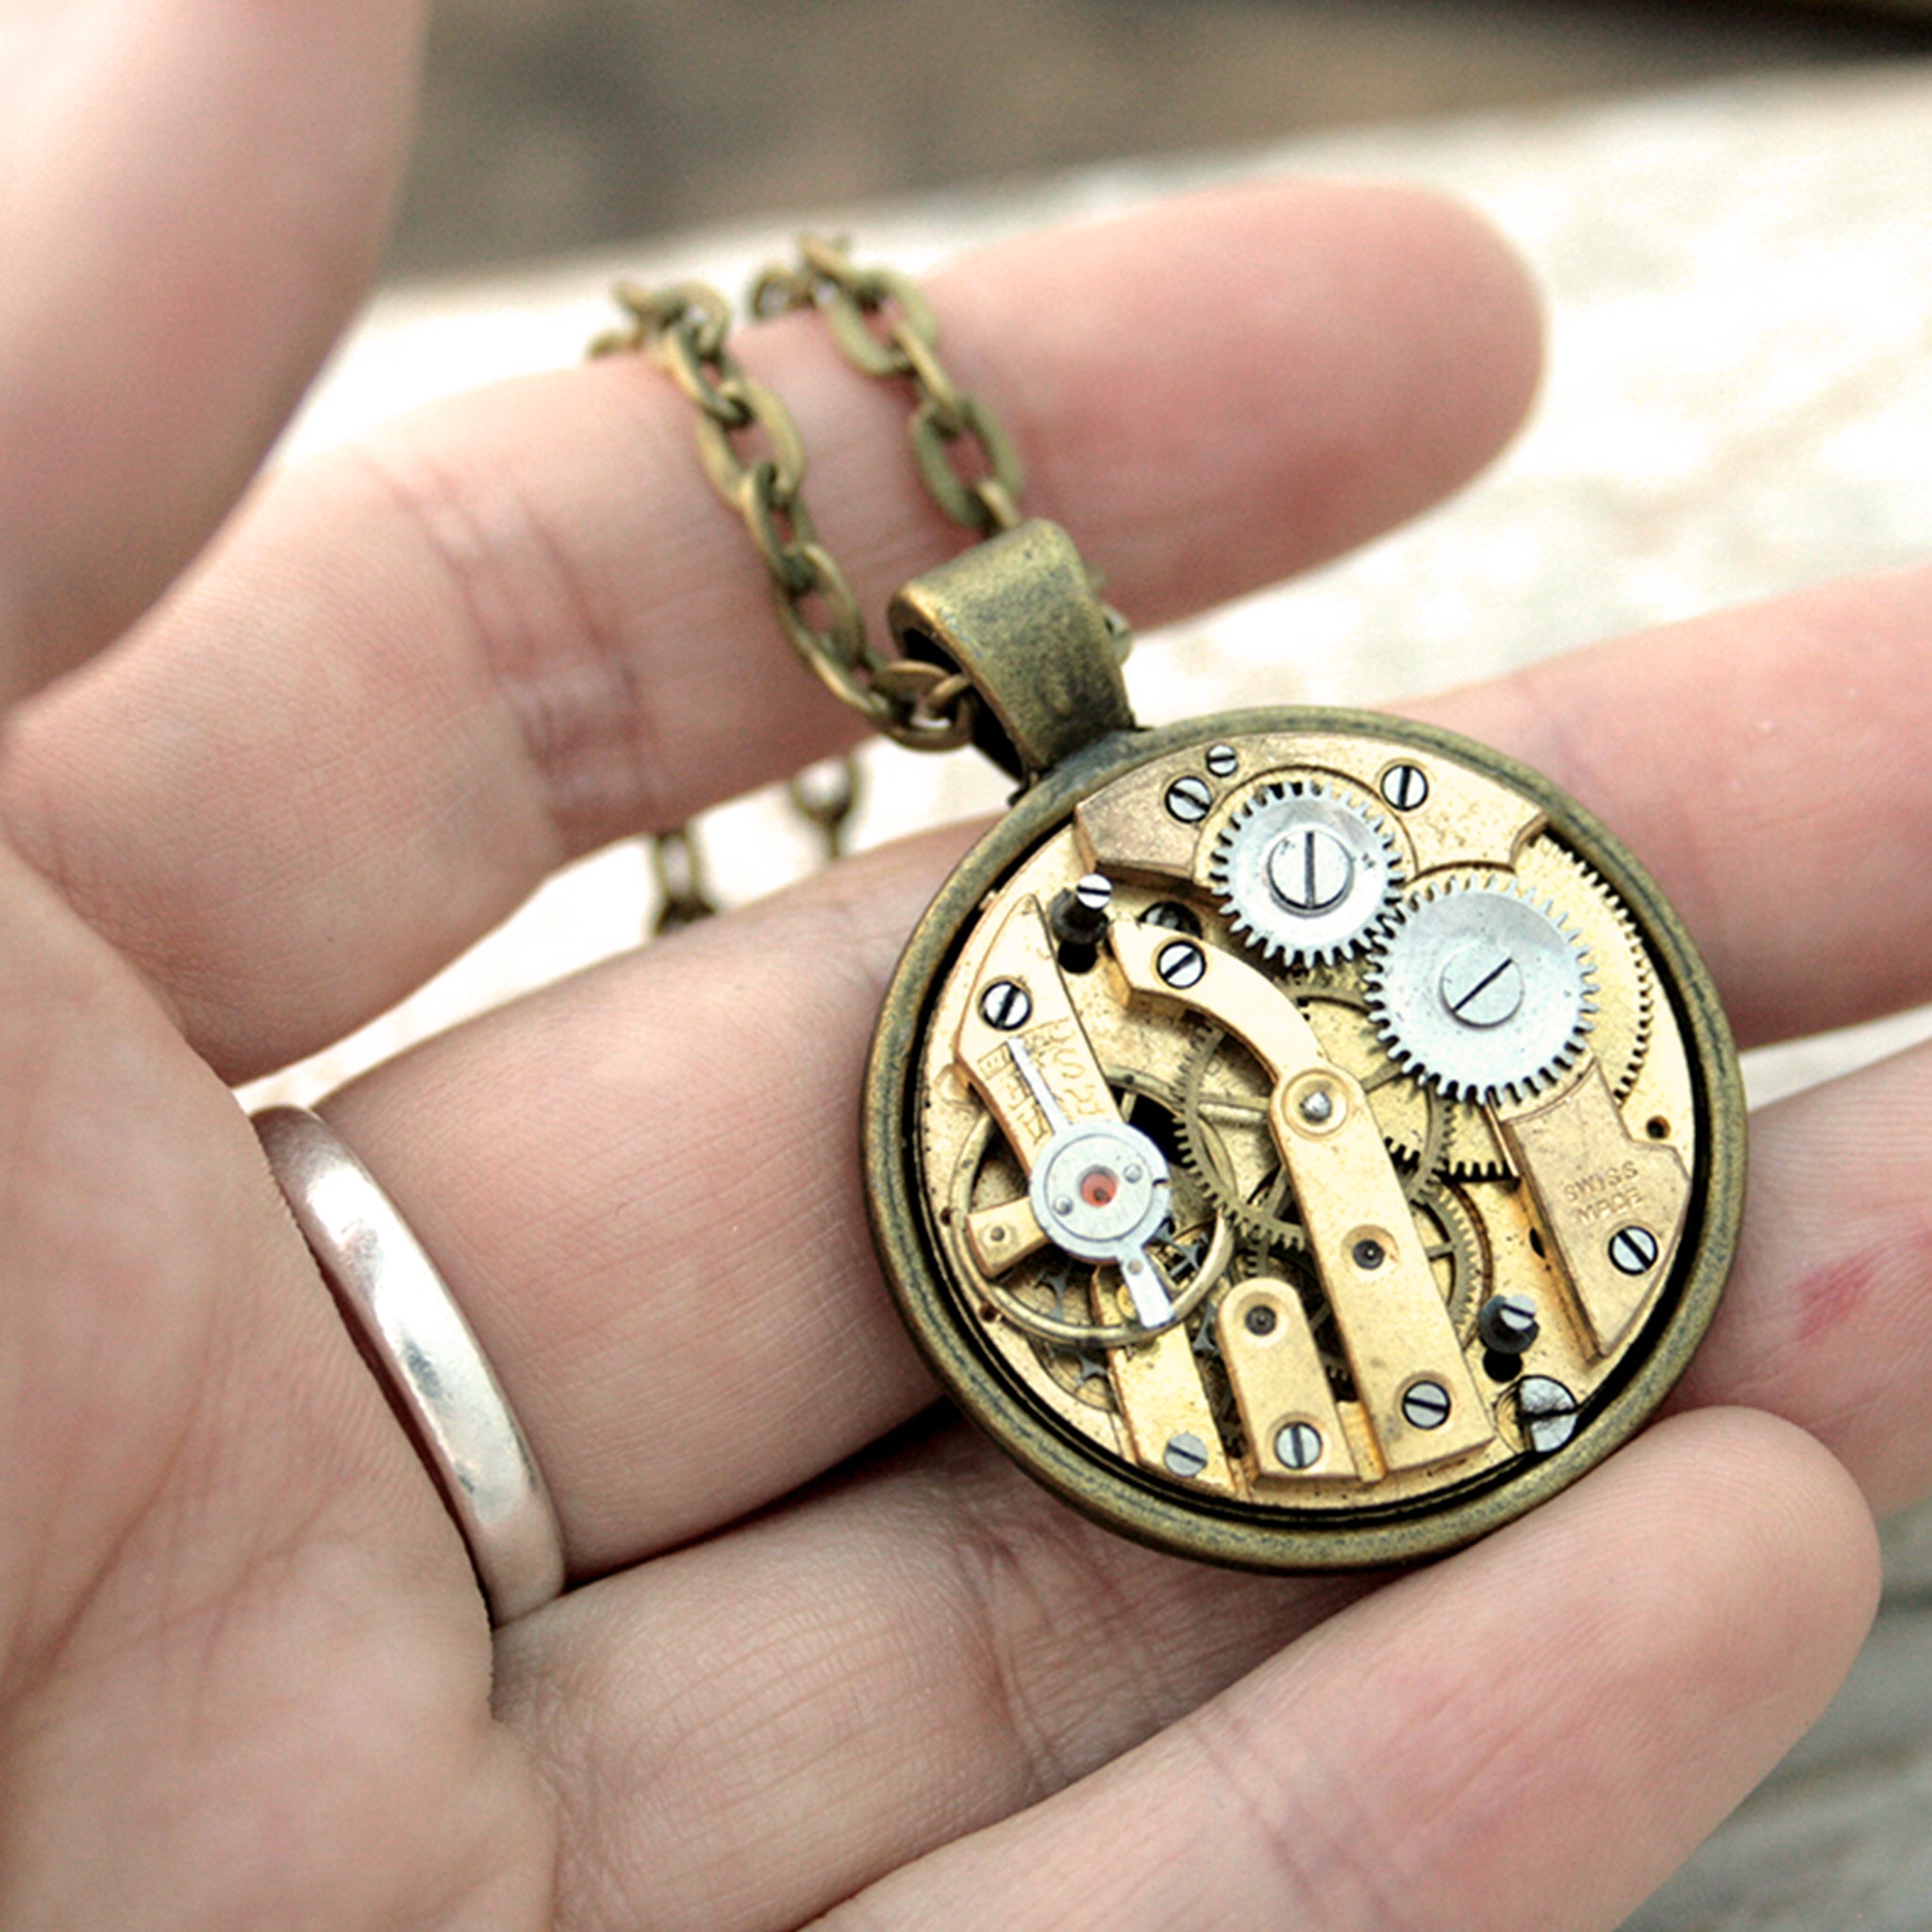 Steampunk Statement Necklace with Gold tone watch movement